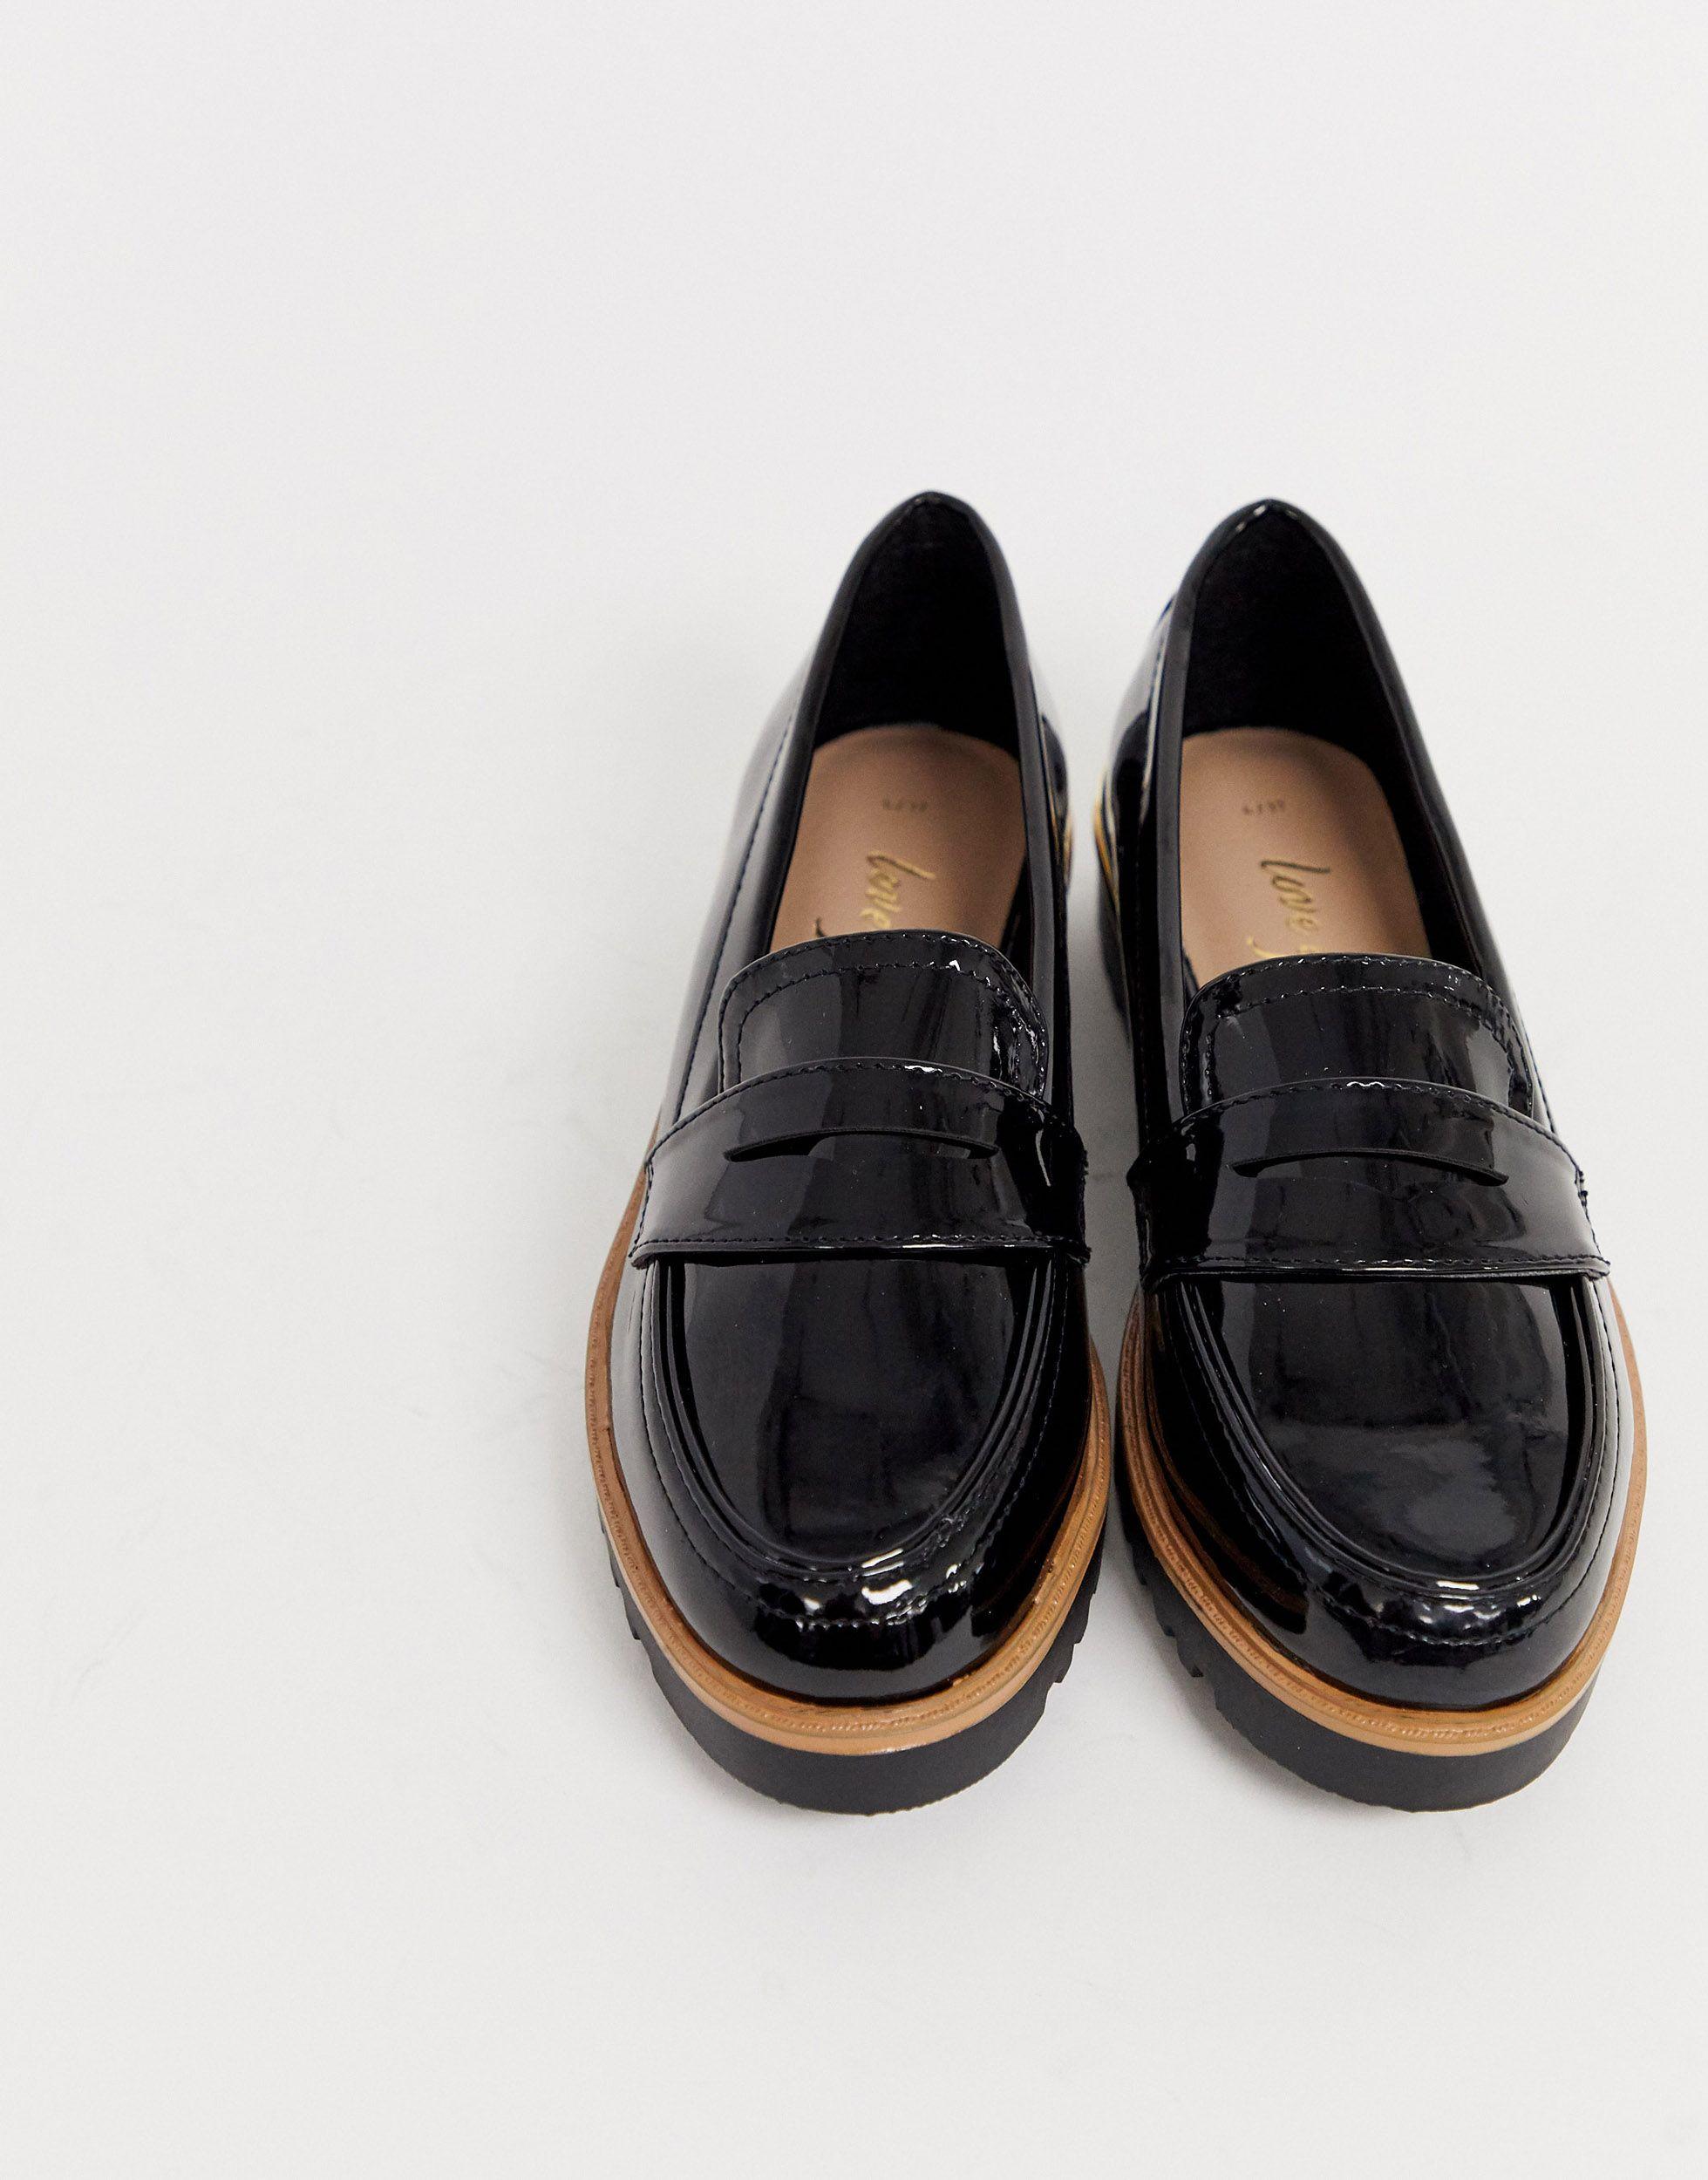 New Look Chunky Patent Loafers In Black Lyst, 46% OFF